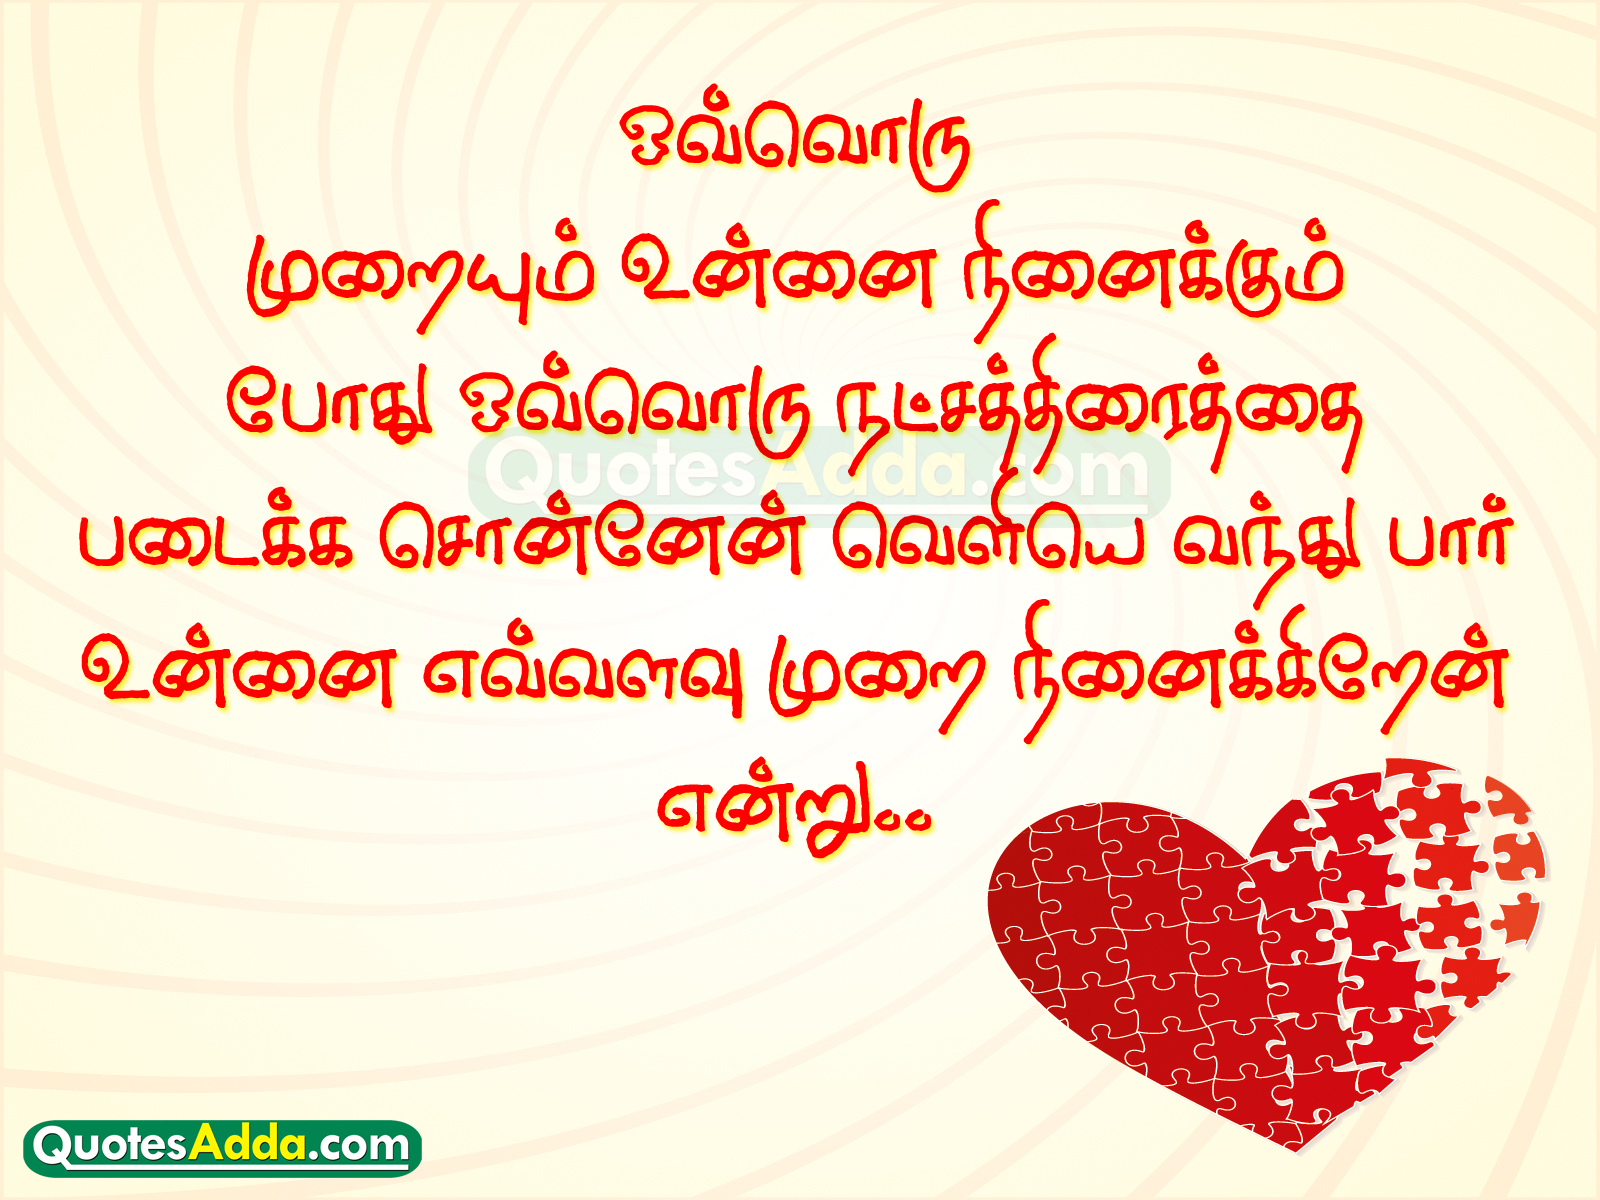 Tamil Love Quotes with Tamil Kadhal Kavithai Pictures | QuotesAdda.com